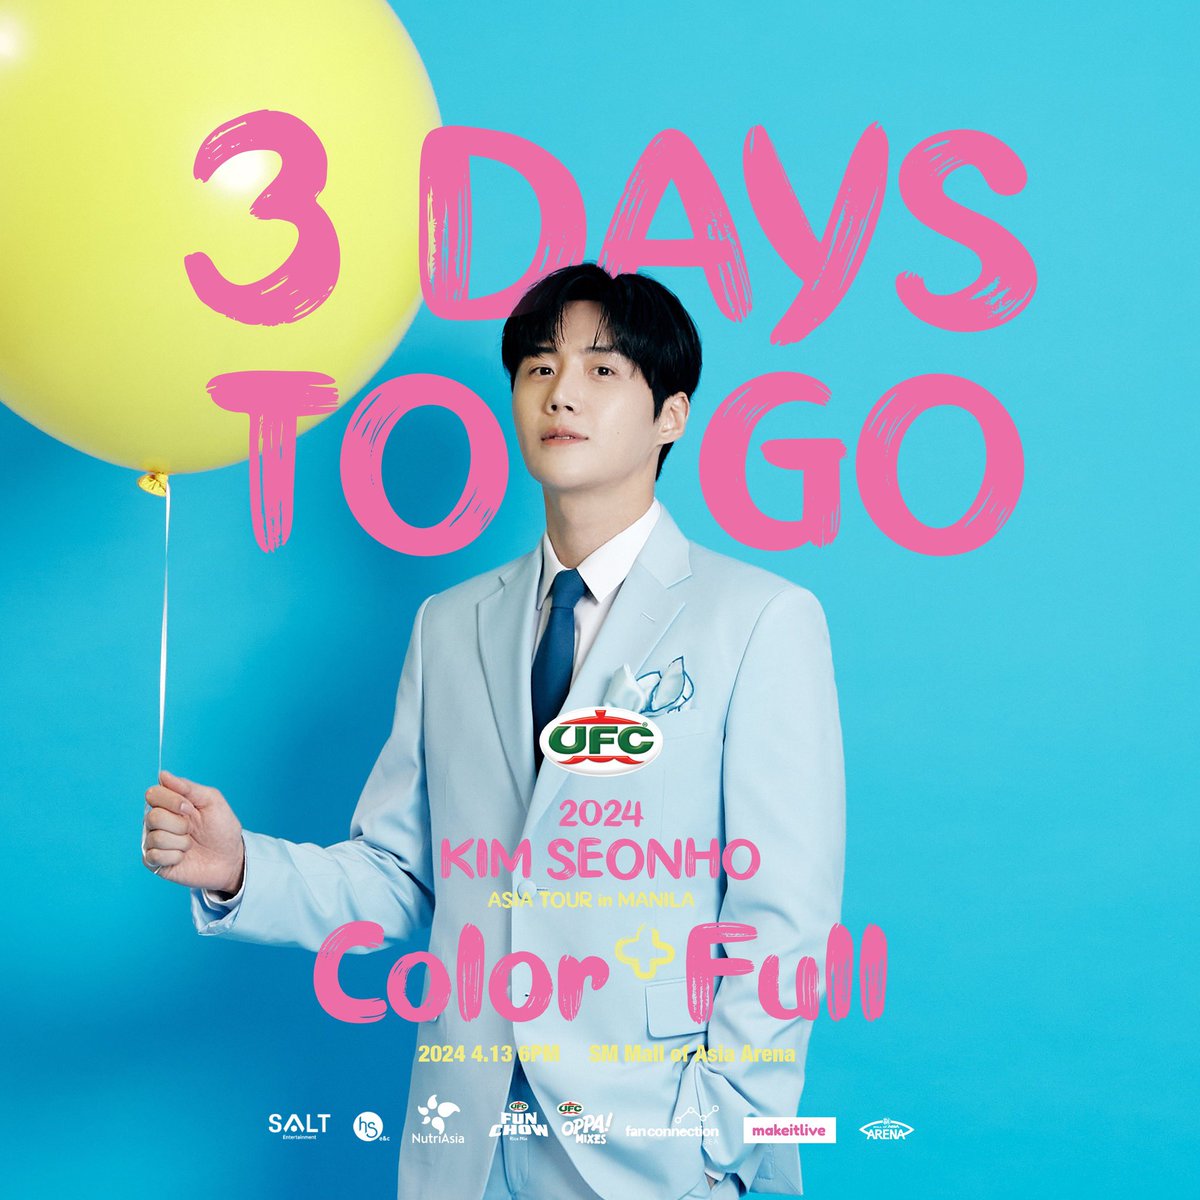 3 more days left until our favorite good boy returns to Manila! ✨ You can purchase your fan packages and watch only tickets on makeitlive.asia! 🎫 #2024KimSeonHoAsiaTourInManila #ColorFull_In_Manila #UFCxKSH